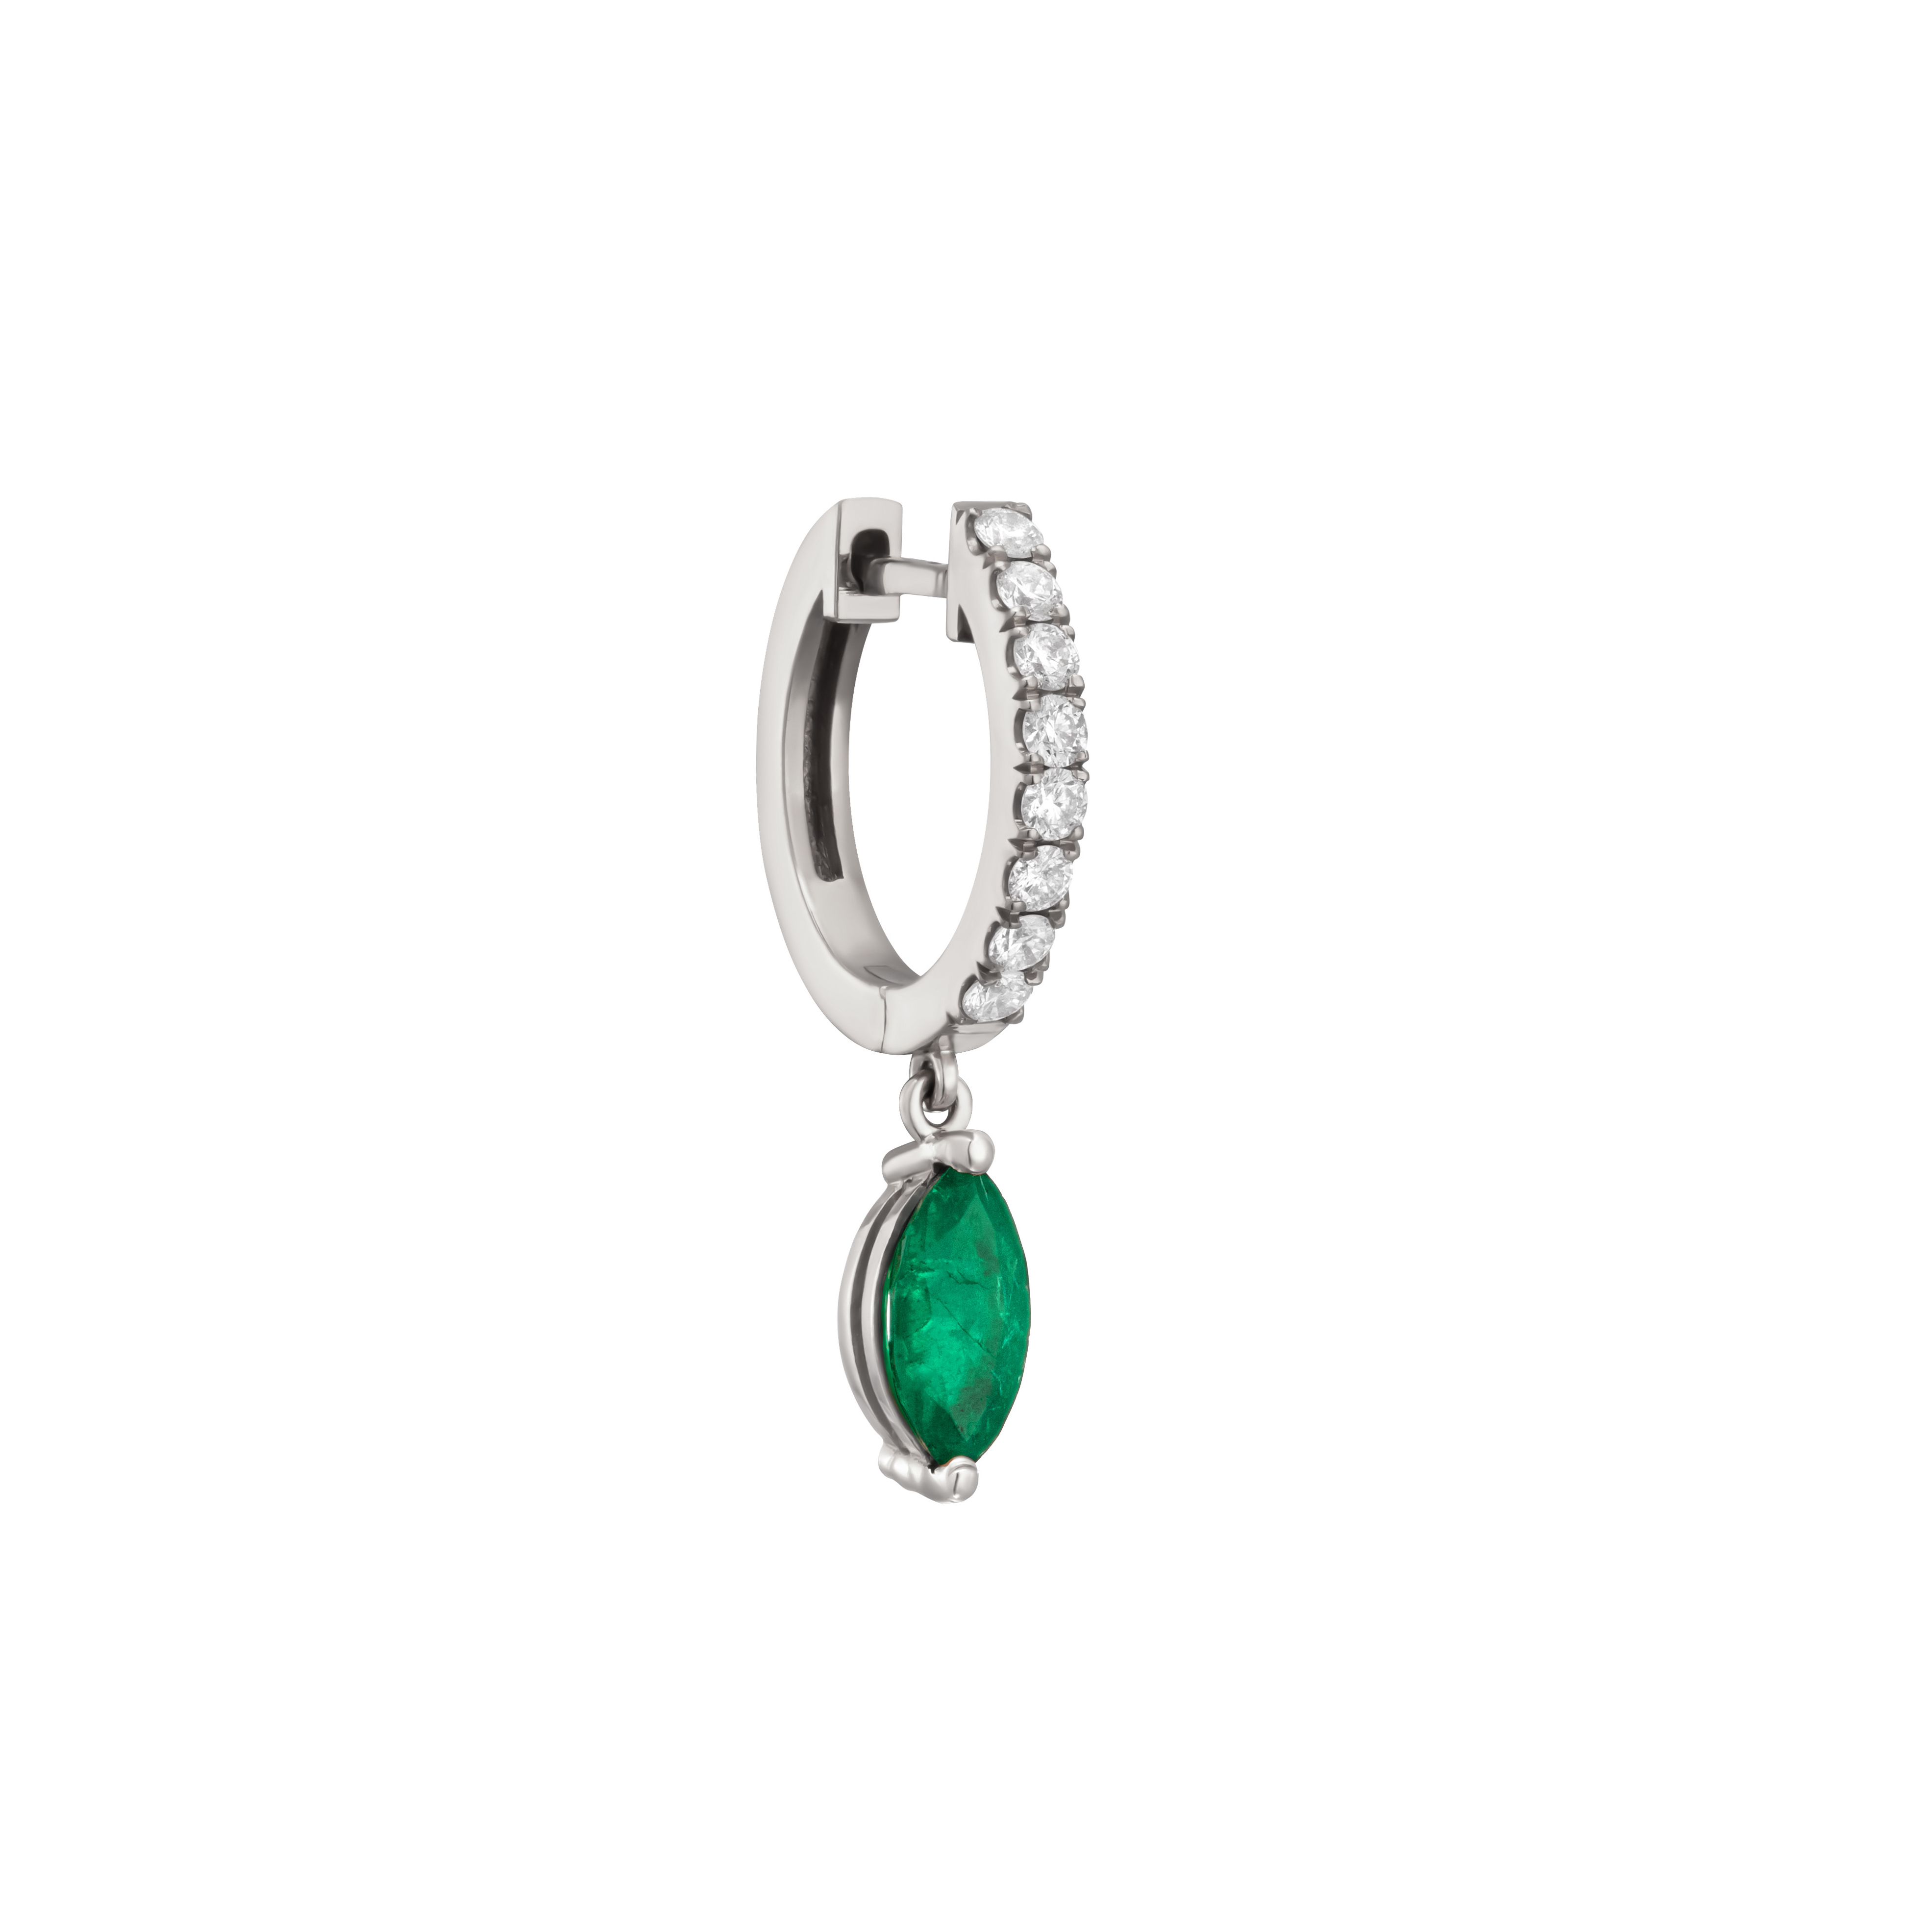 Single diamond huggie with marquise shaped natural emerald drop